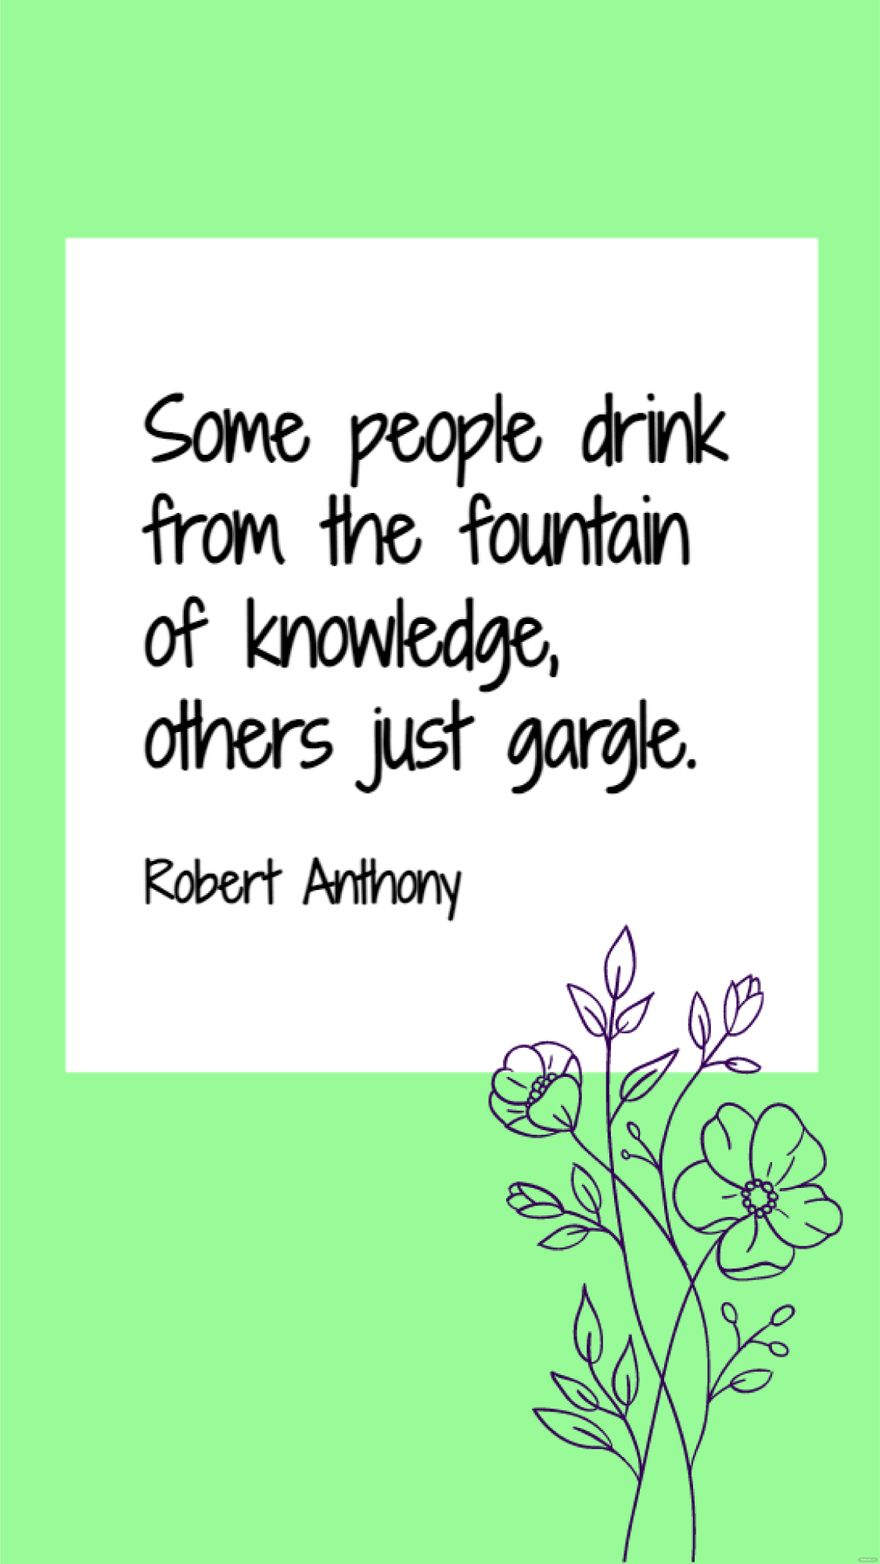 Free Robert Anthony - Some people drink from the fountain of knowledge, others just gargle. in JPG